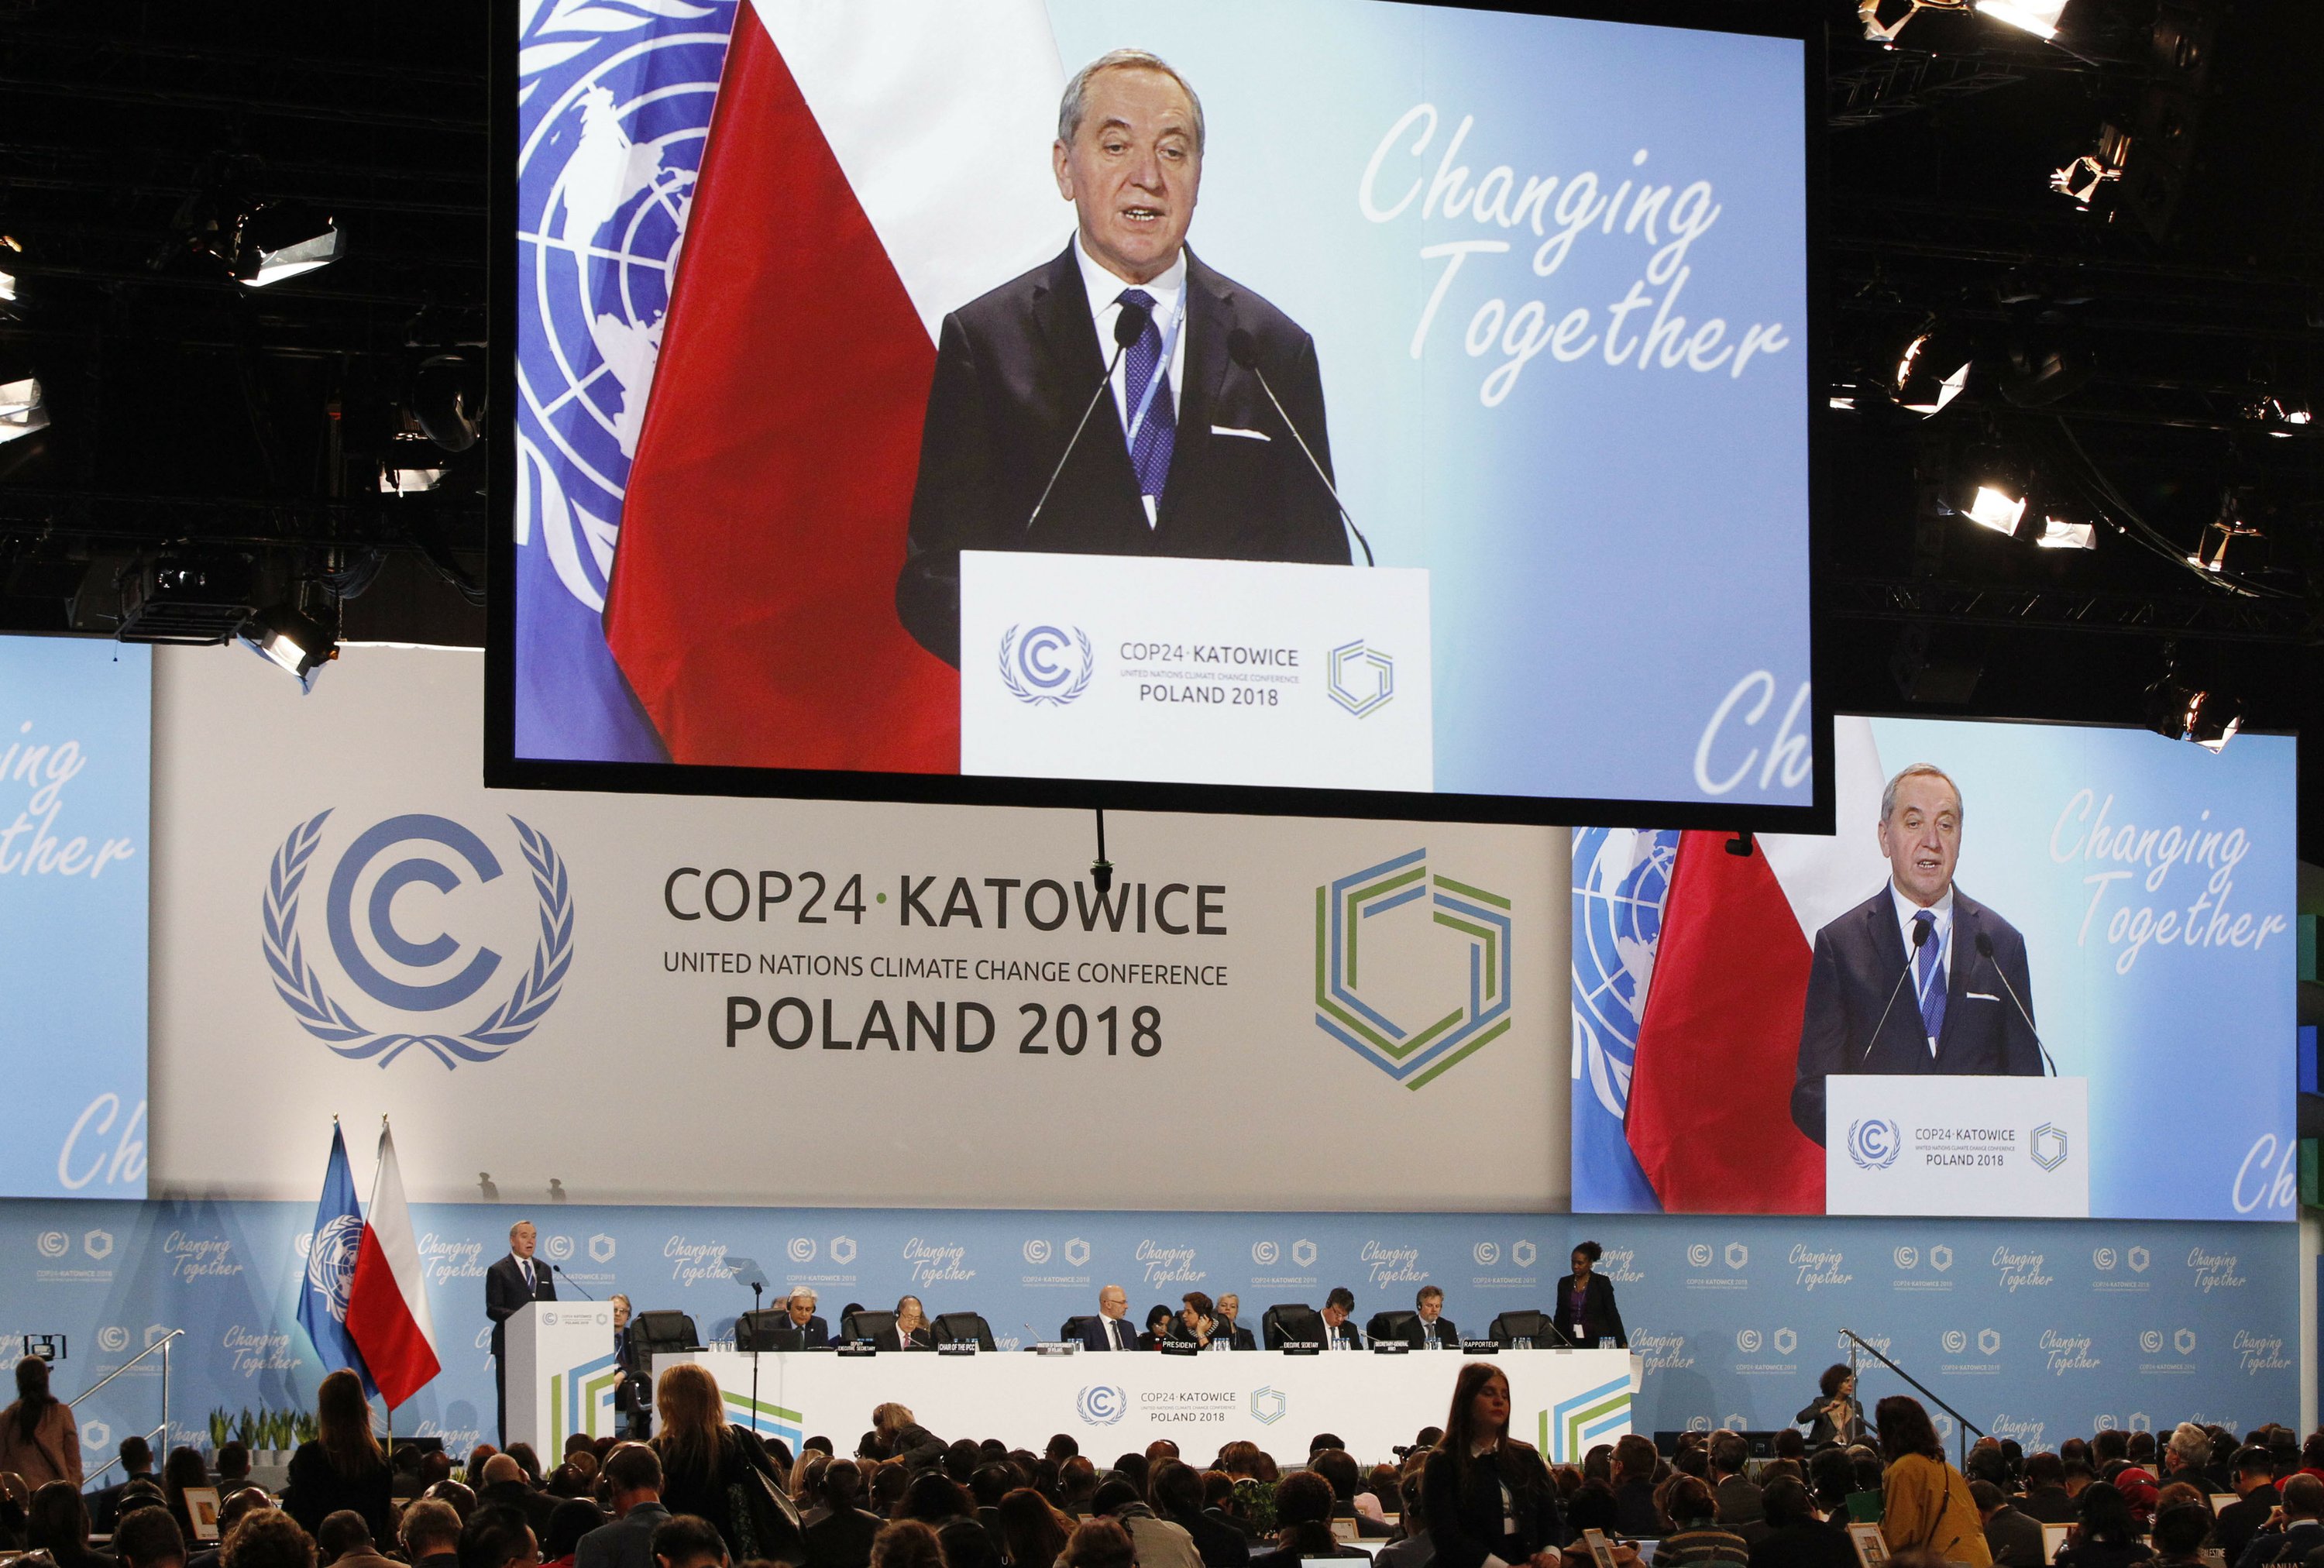 UN science panel chief calls for more action to curb warming